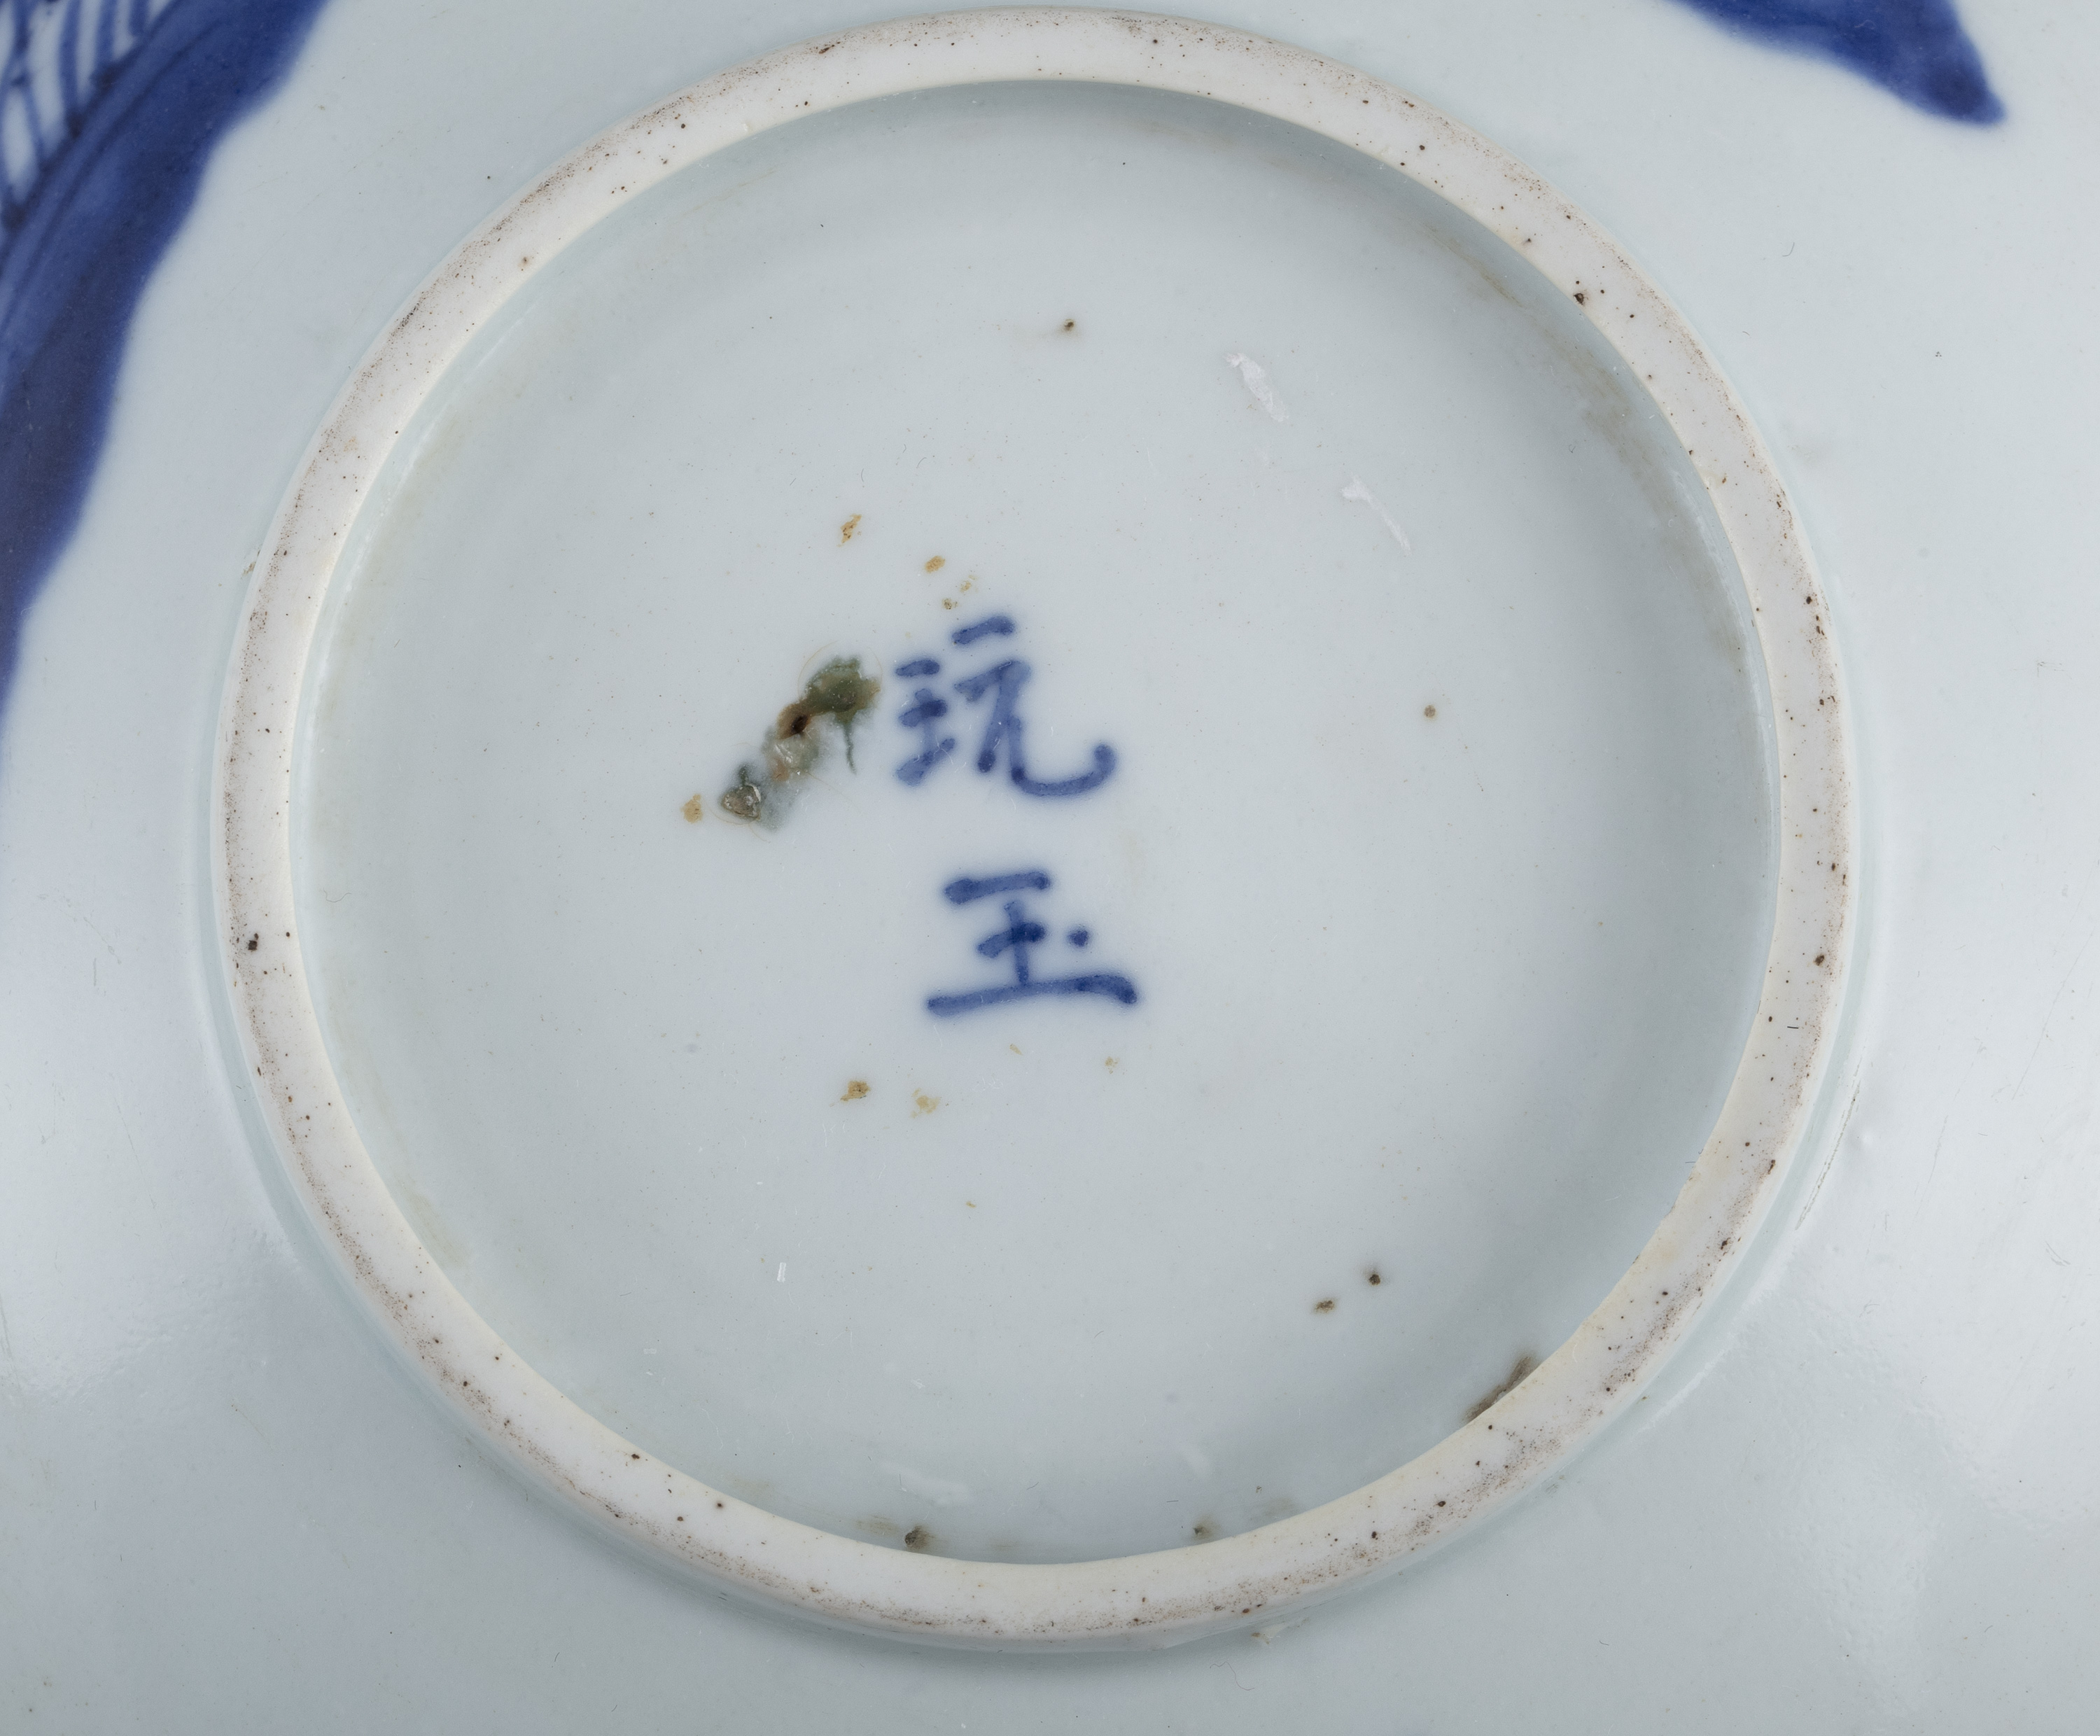 A BLEU DE HUE PORCELAIN BOWL ‘CRAB AND LOTUS POND’ BOWL INSCRIBED WITH THE MARK NGOẠN NGỌC 玩玉 - Image 17 of 18